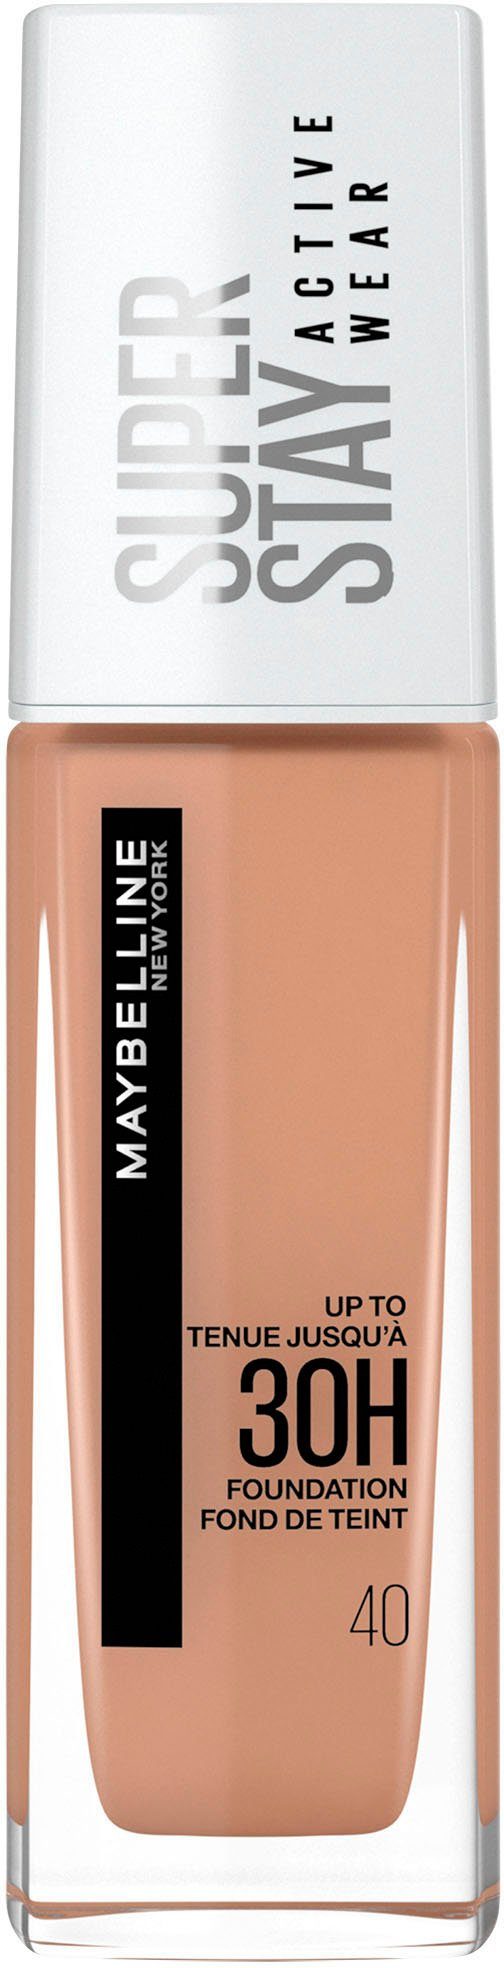 YORK Active Foundation Super Wear MAYBELLINE Fawn 40 NEW Stay